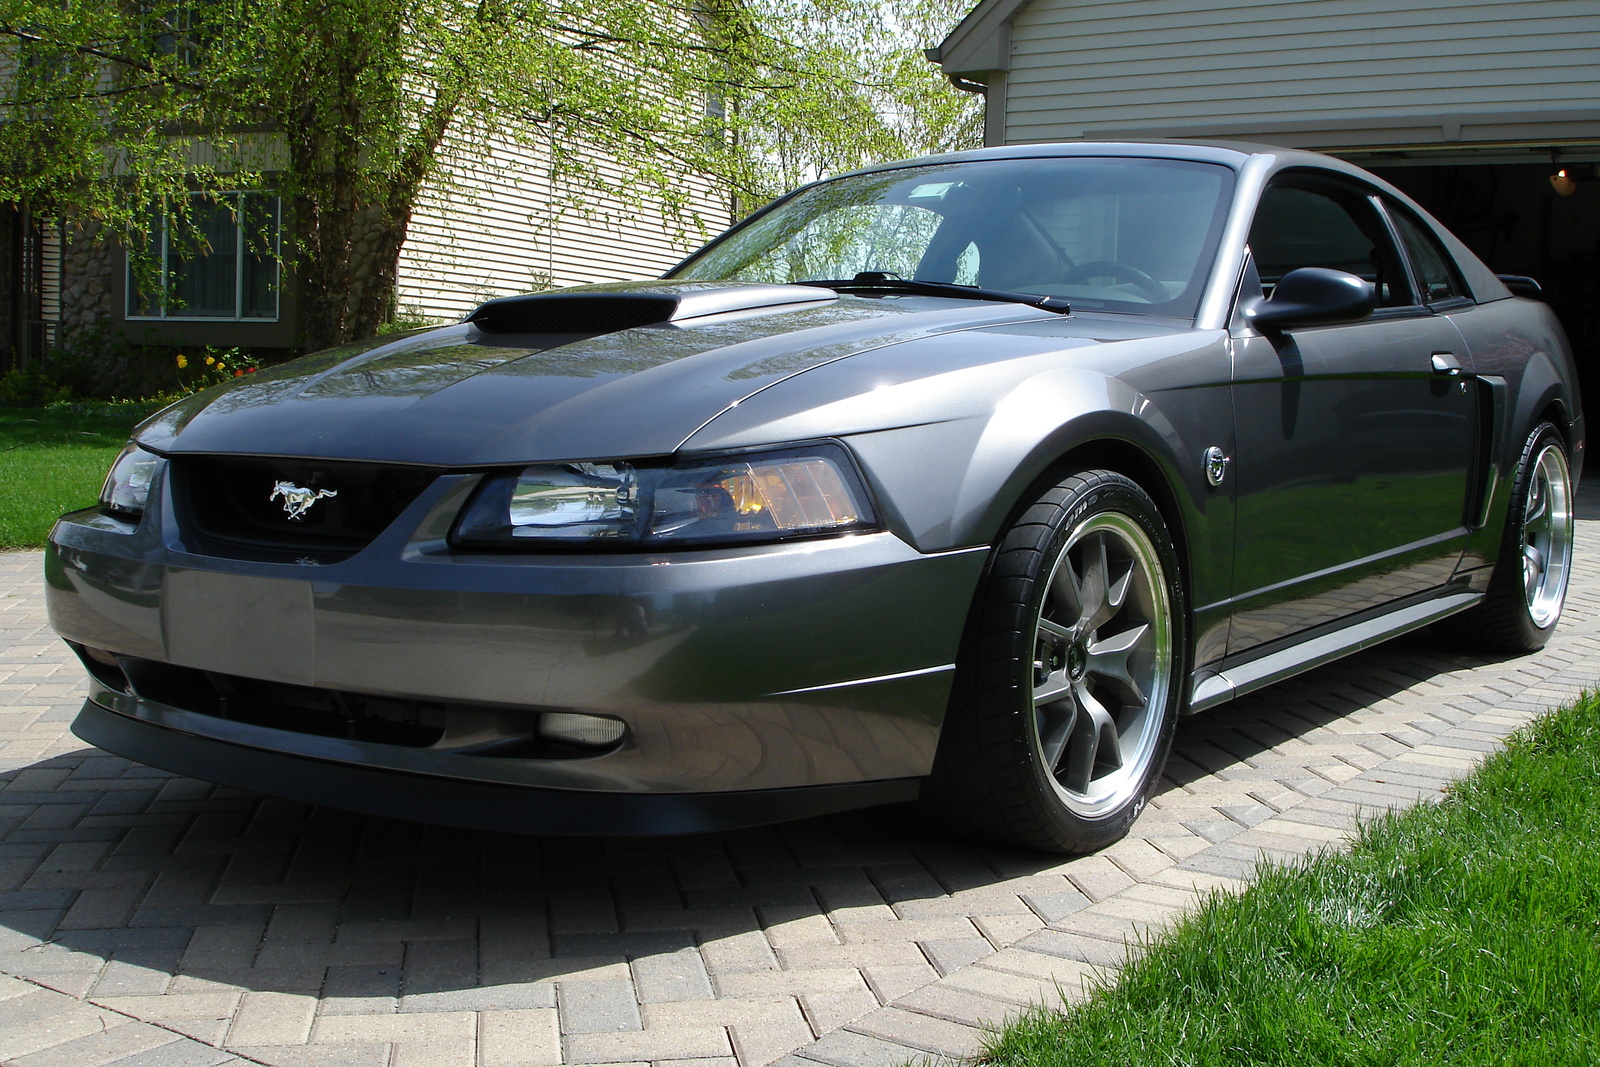 2004 Ford mustang gt deluxe specs #3